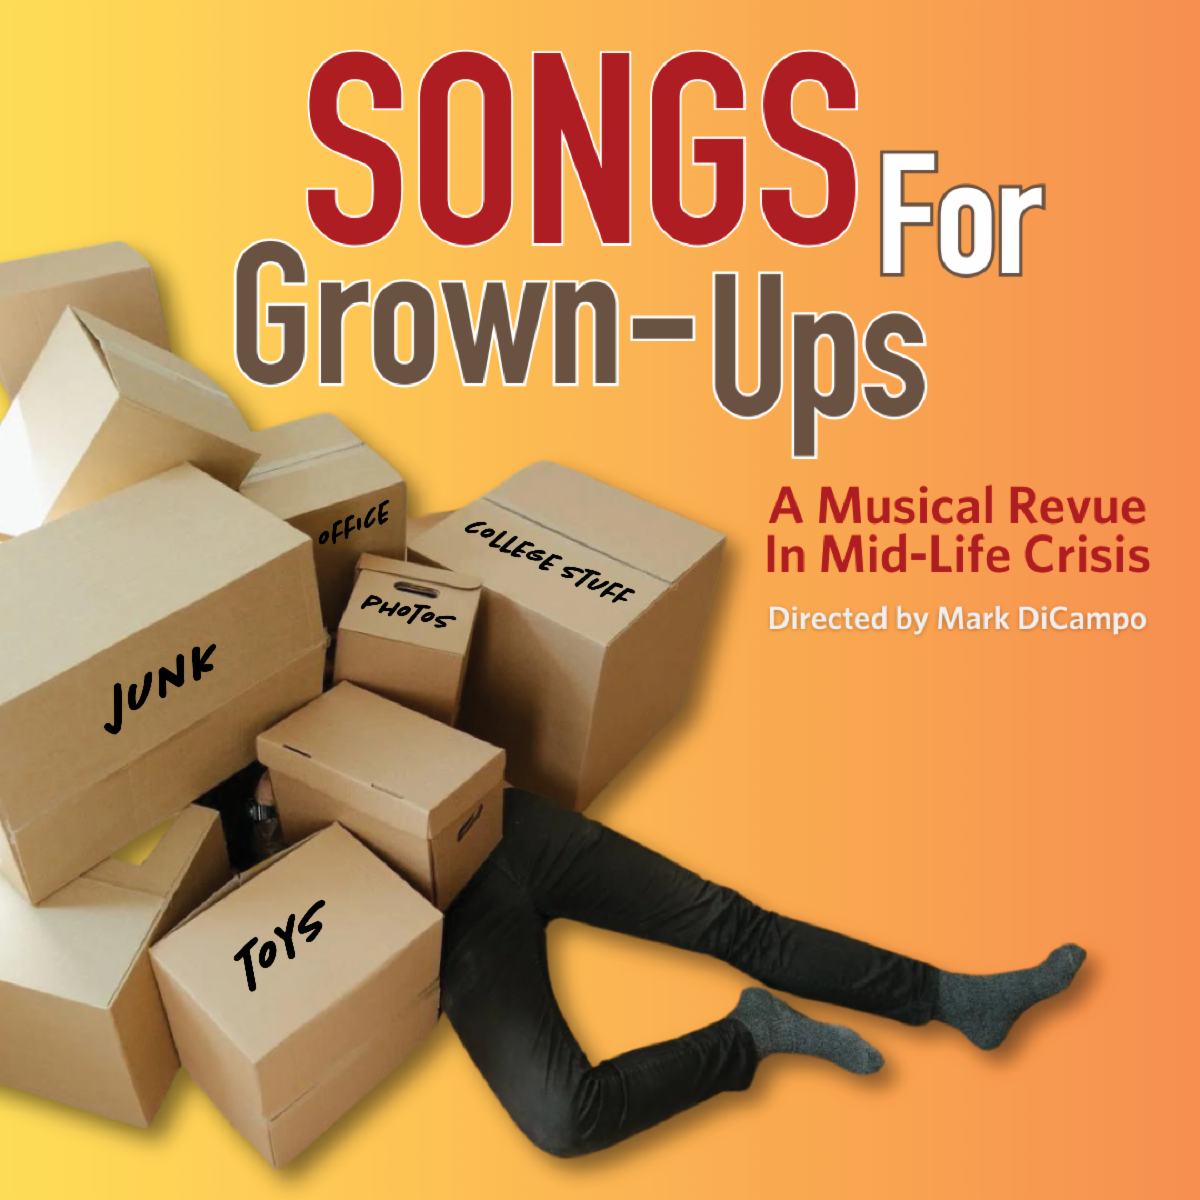 Songs for Grown-Ups at HCA Feb. 29-March 9